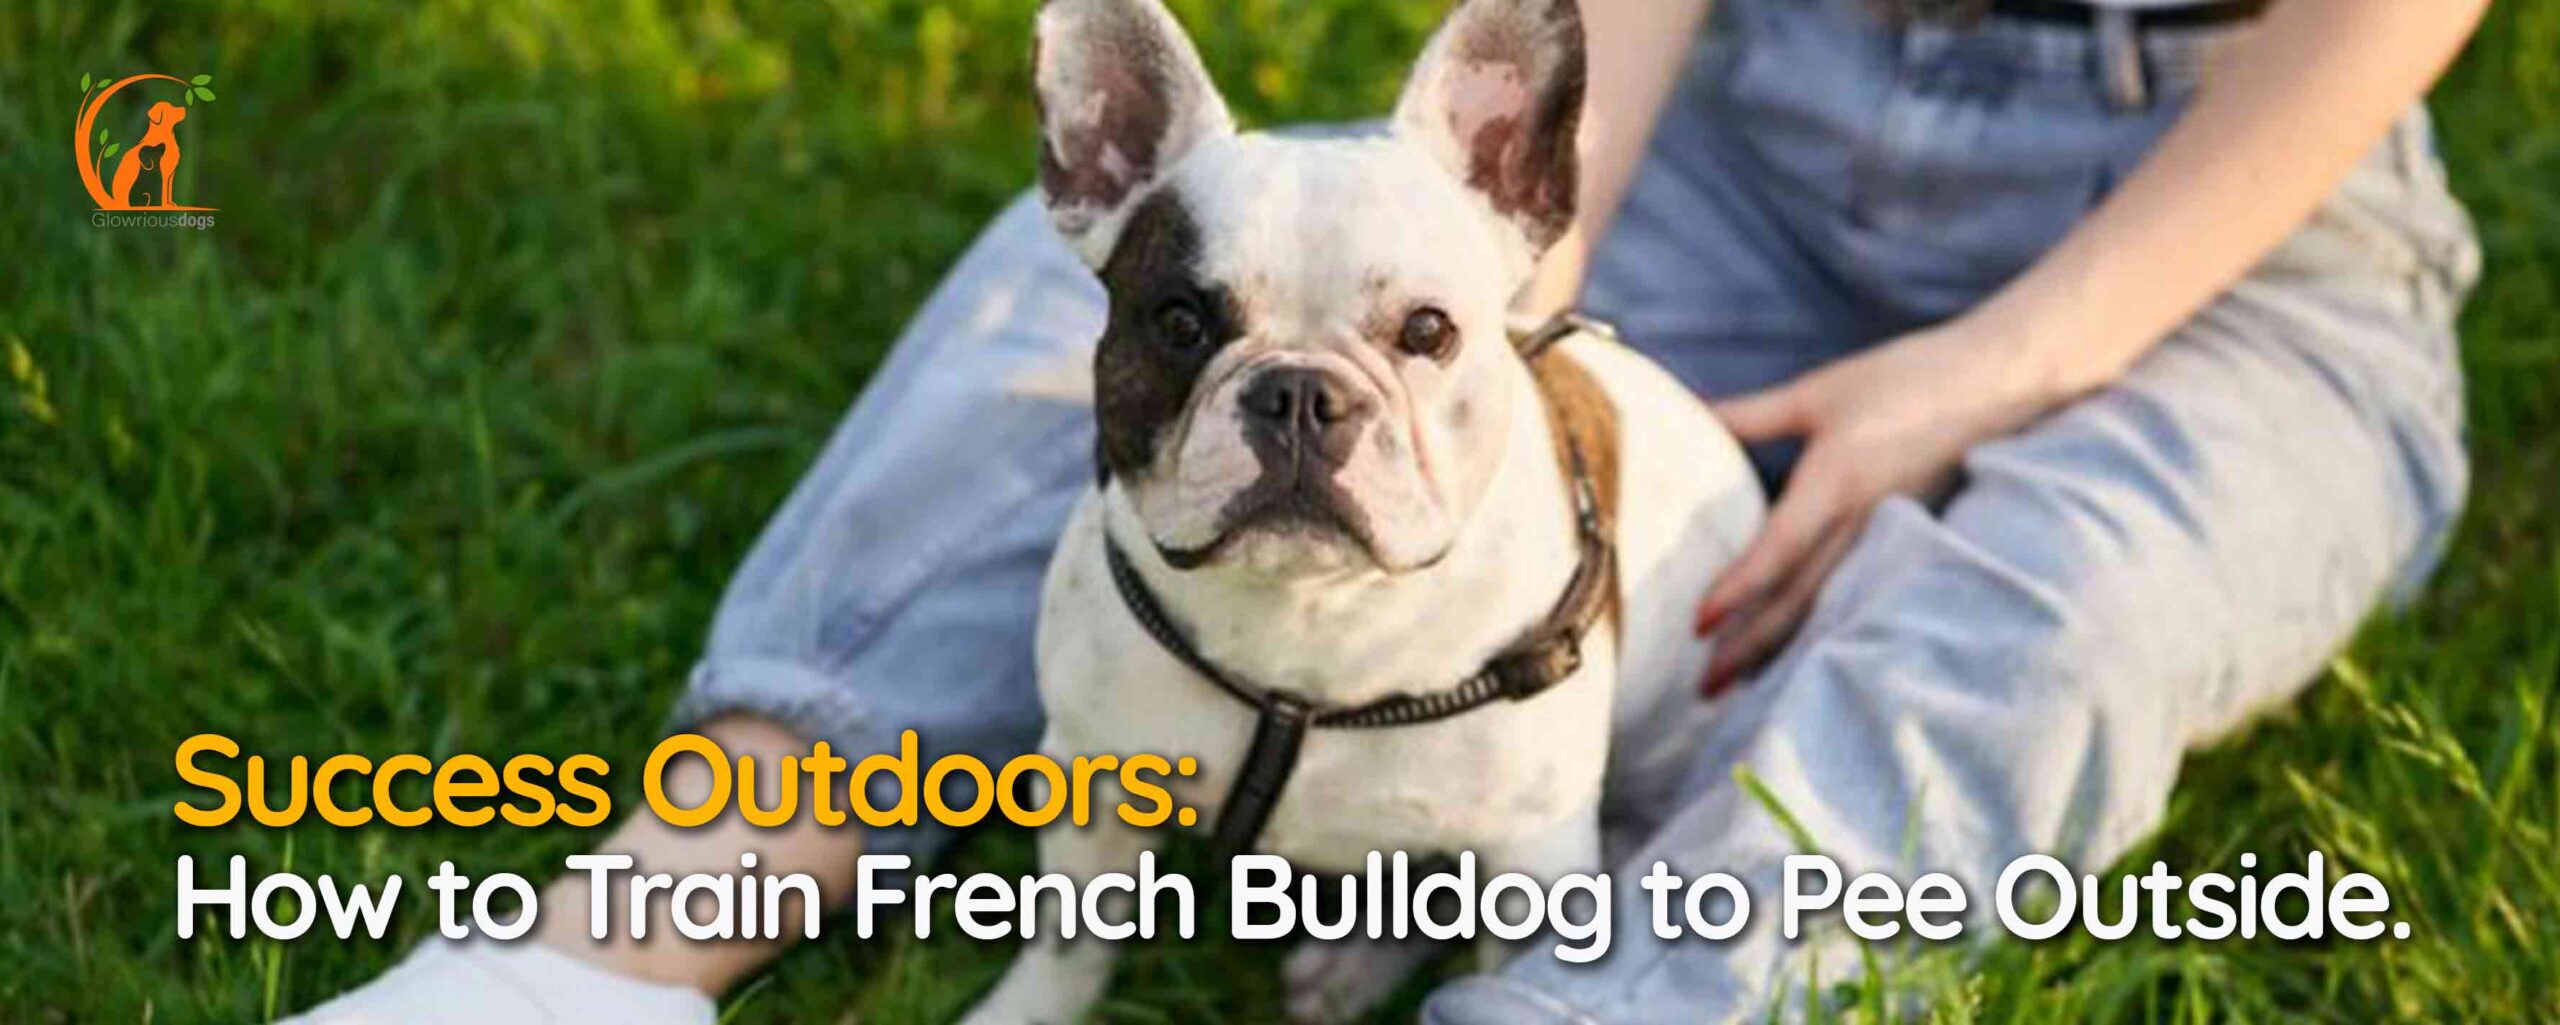 Success Outdoors: How to Train French Bulldog to Pee Outside.